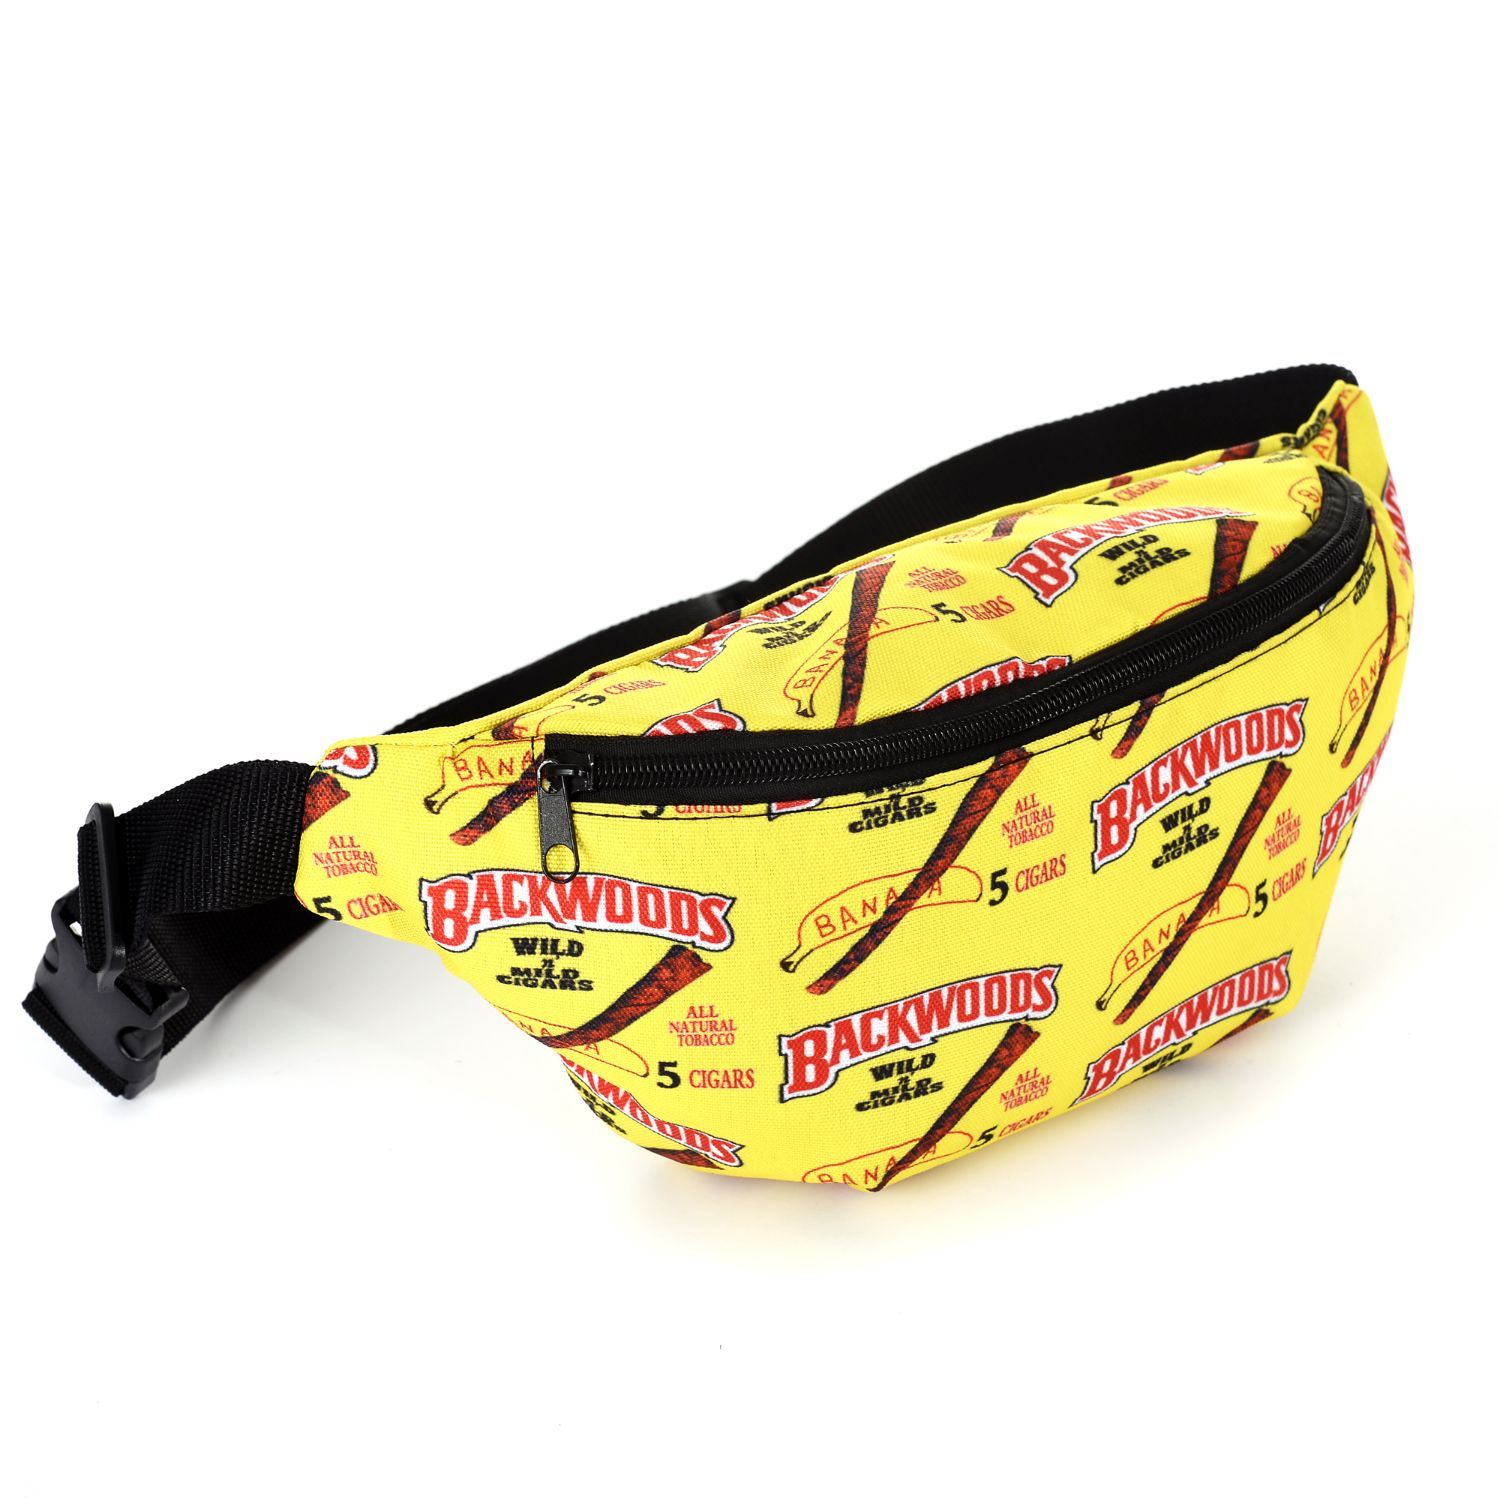 yellow fanny pack with black detail and "backwoods" in red